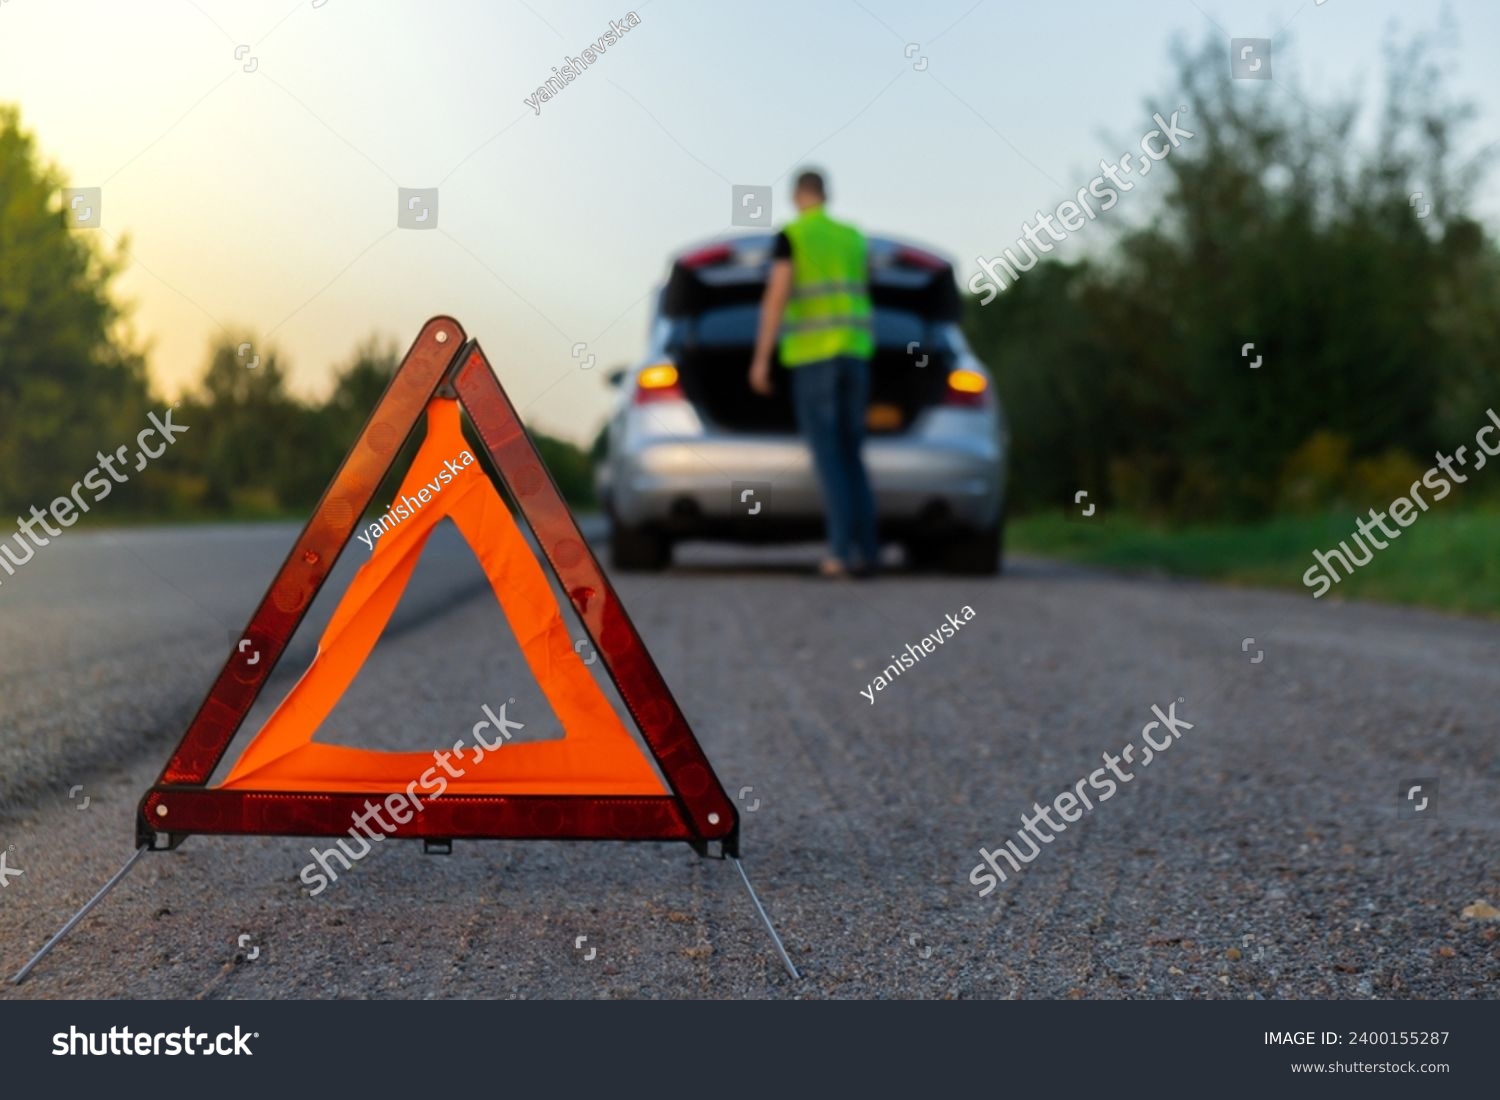 Broken silver luxury car emergency accident. Man driver installing red triangle stop sign on road. Sport automobile turned on blinkers technical problems on the road. Safety procedure vehicle broken #2400155287